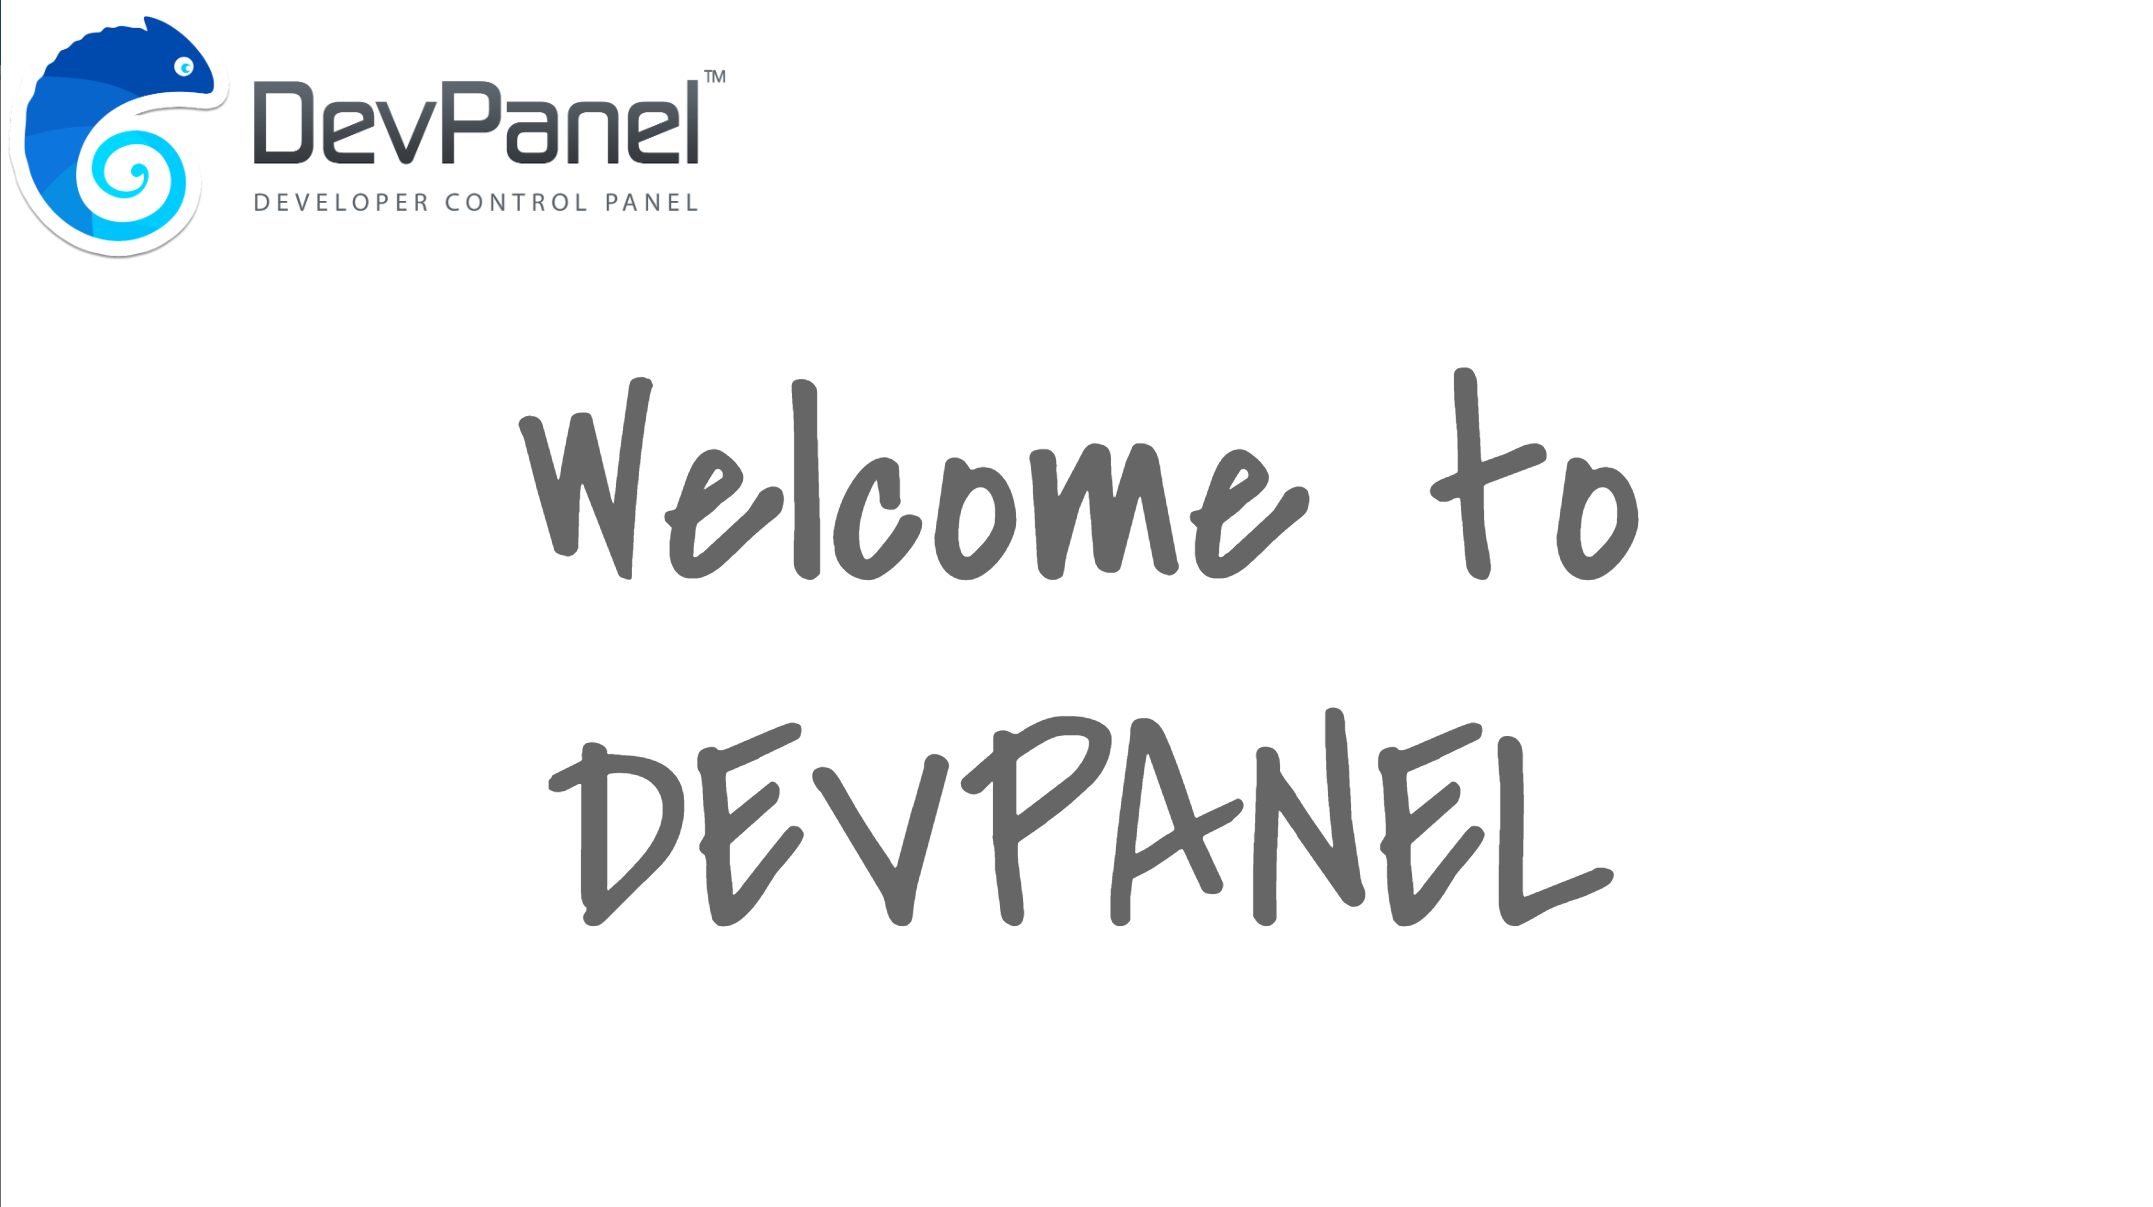 2021-02-25_14-20-59_welcome_to_devpanel.png